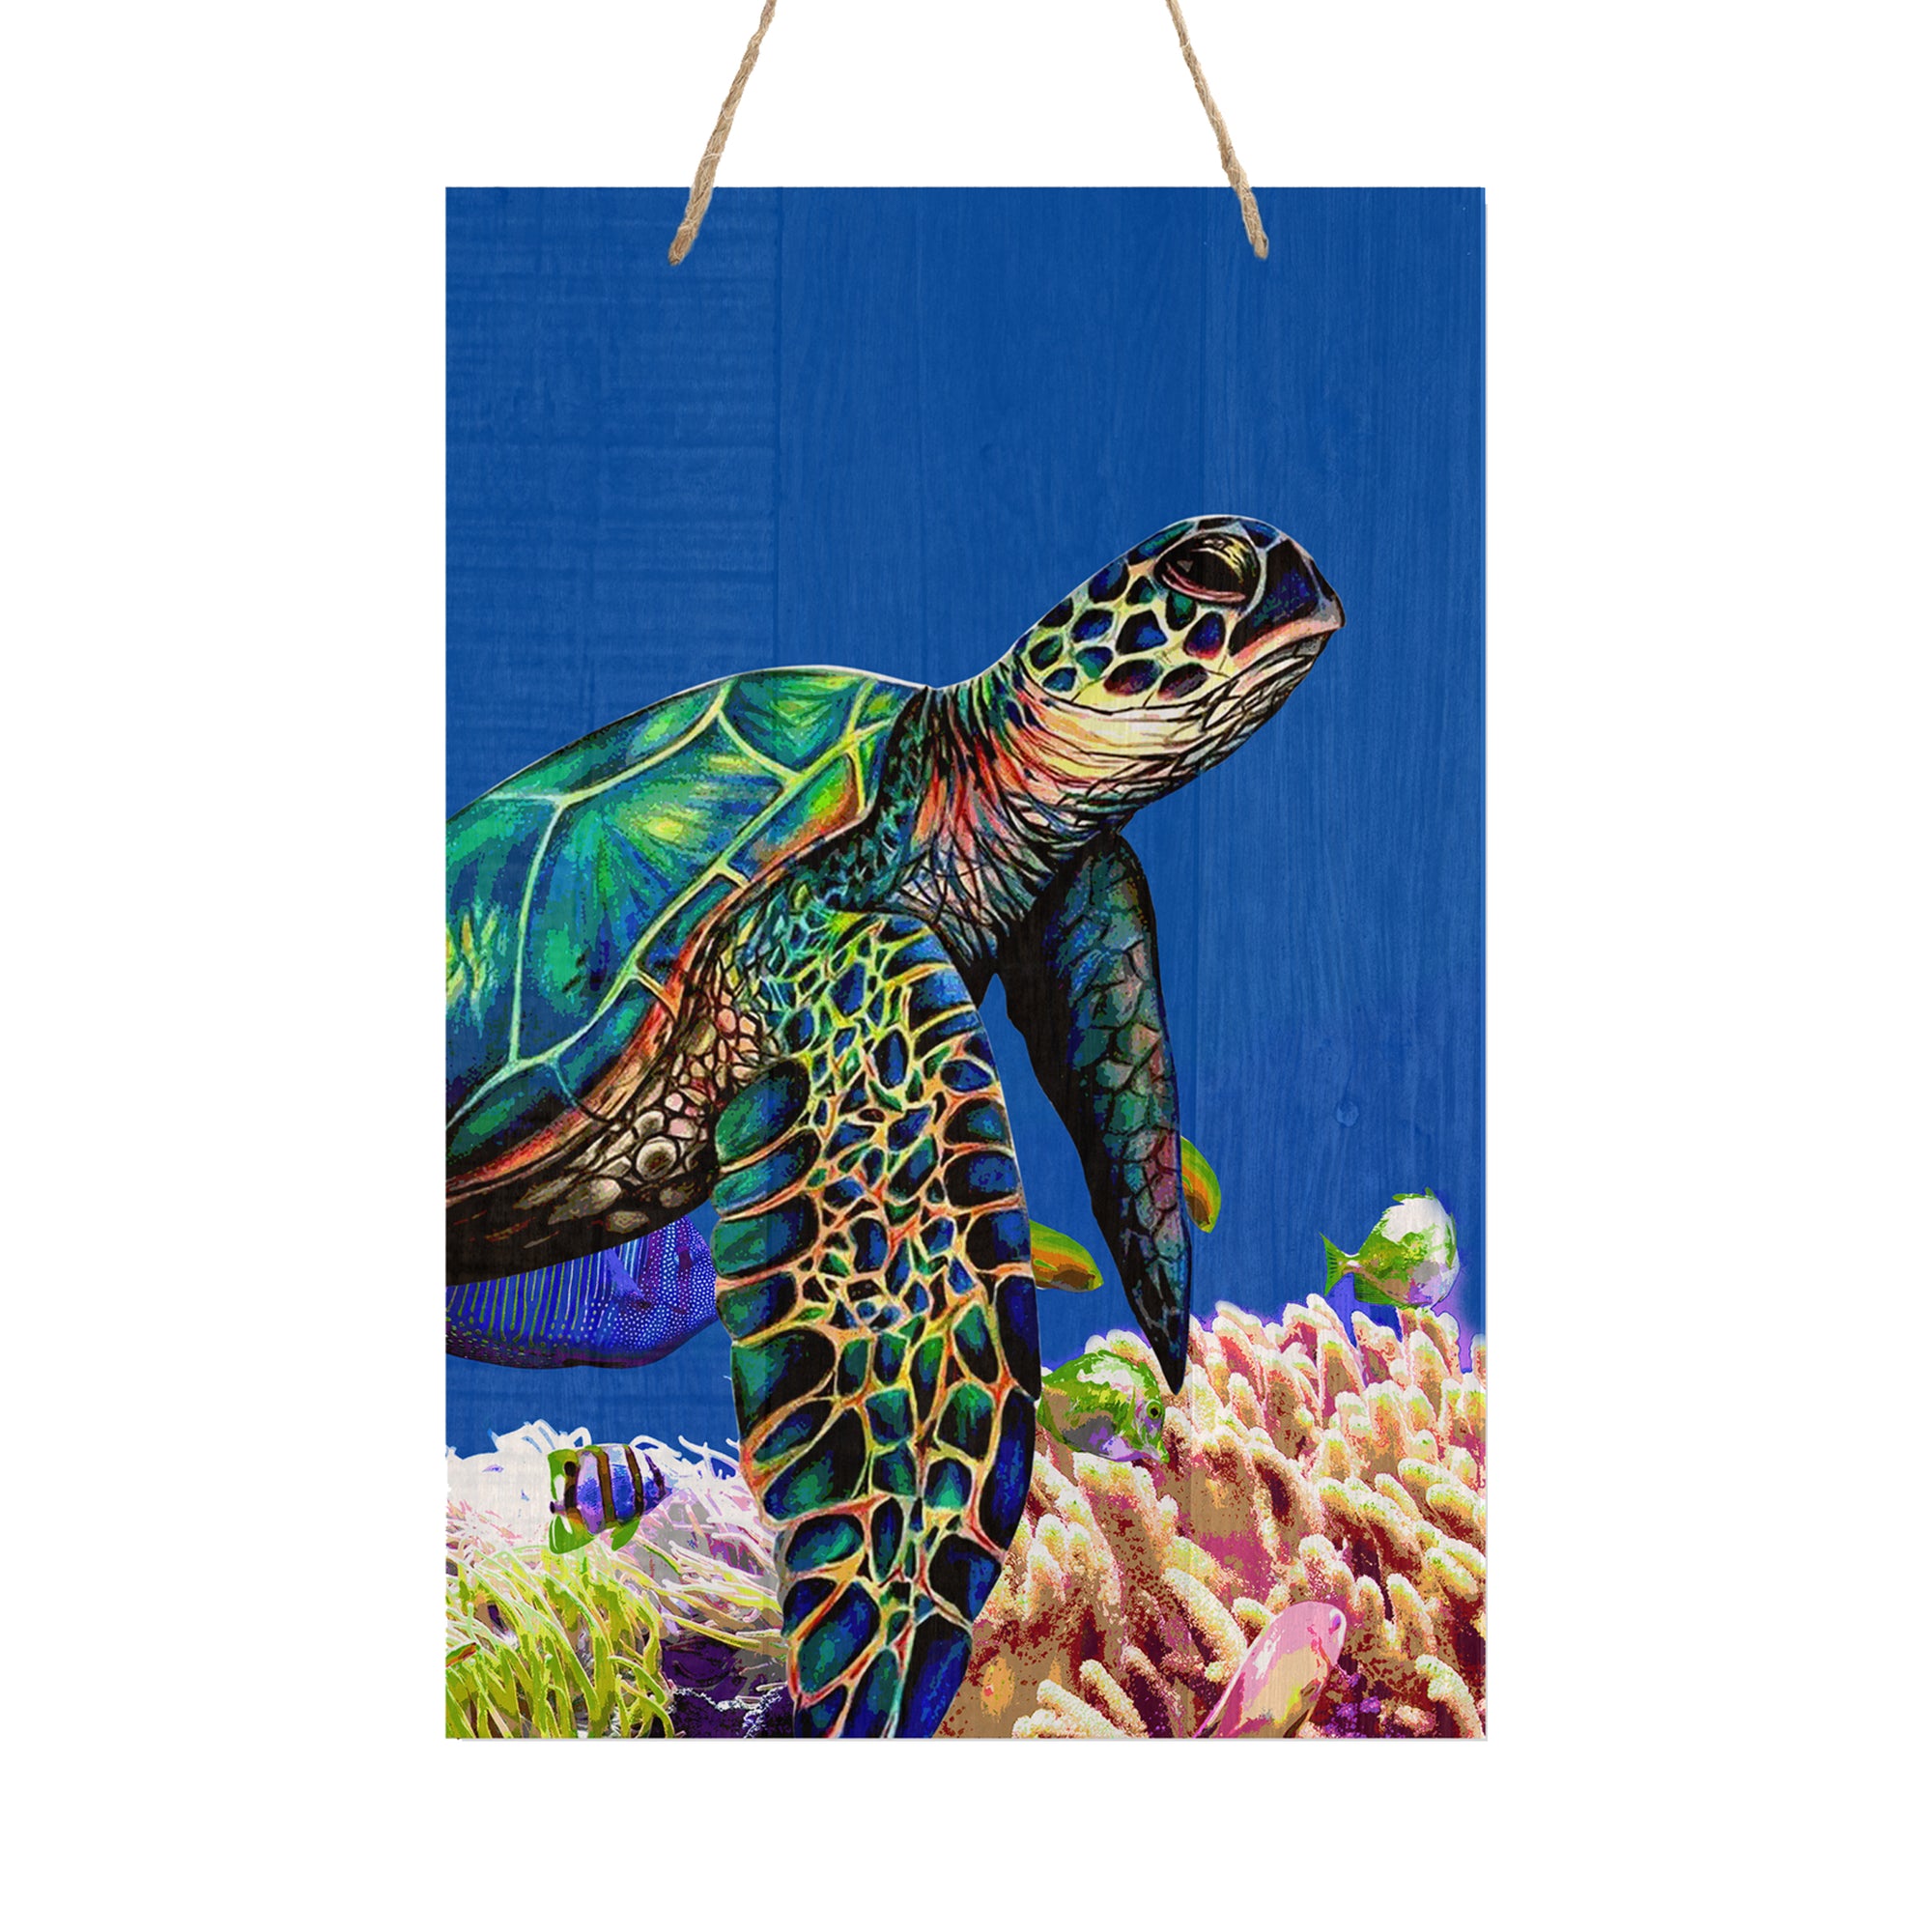 Lifesong Milestones Sea Turtle Art Rope Sign for Modern Wall Decoration 8x12in  Perfect gift ideas for a Newly-Wed Couple’s Housewarming Parties, parents, grandparents, Loved Ones, and friends.